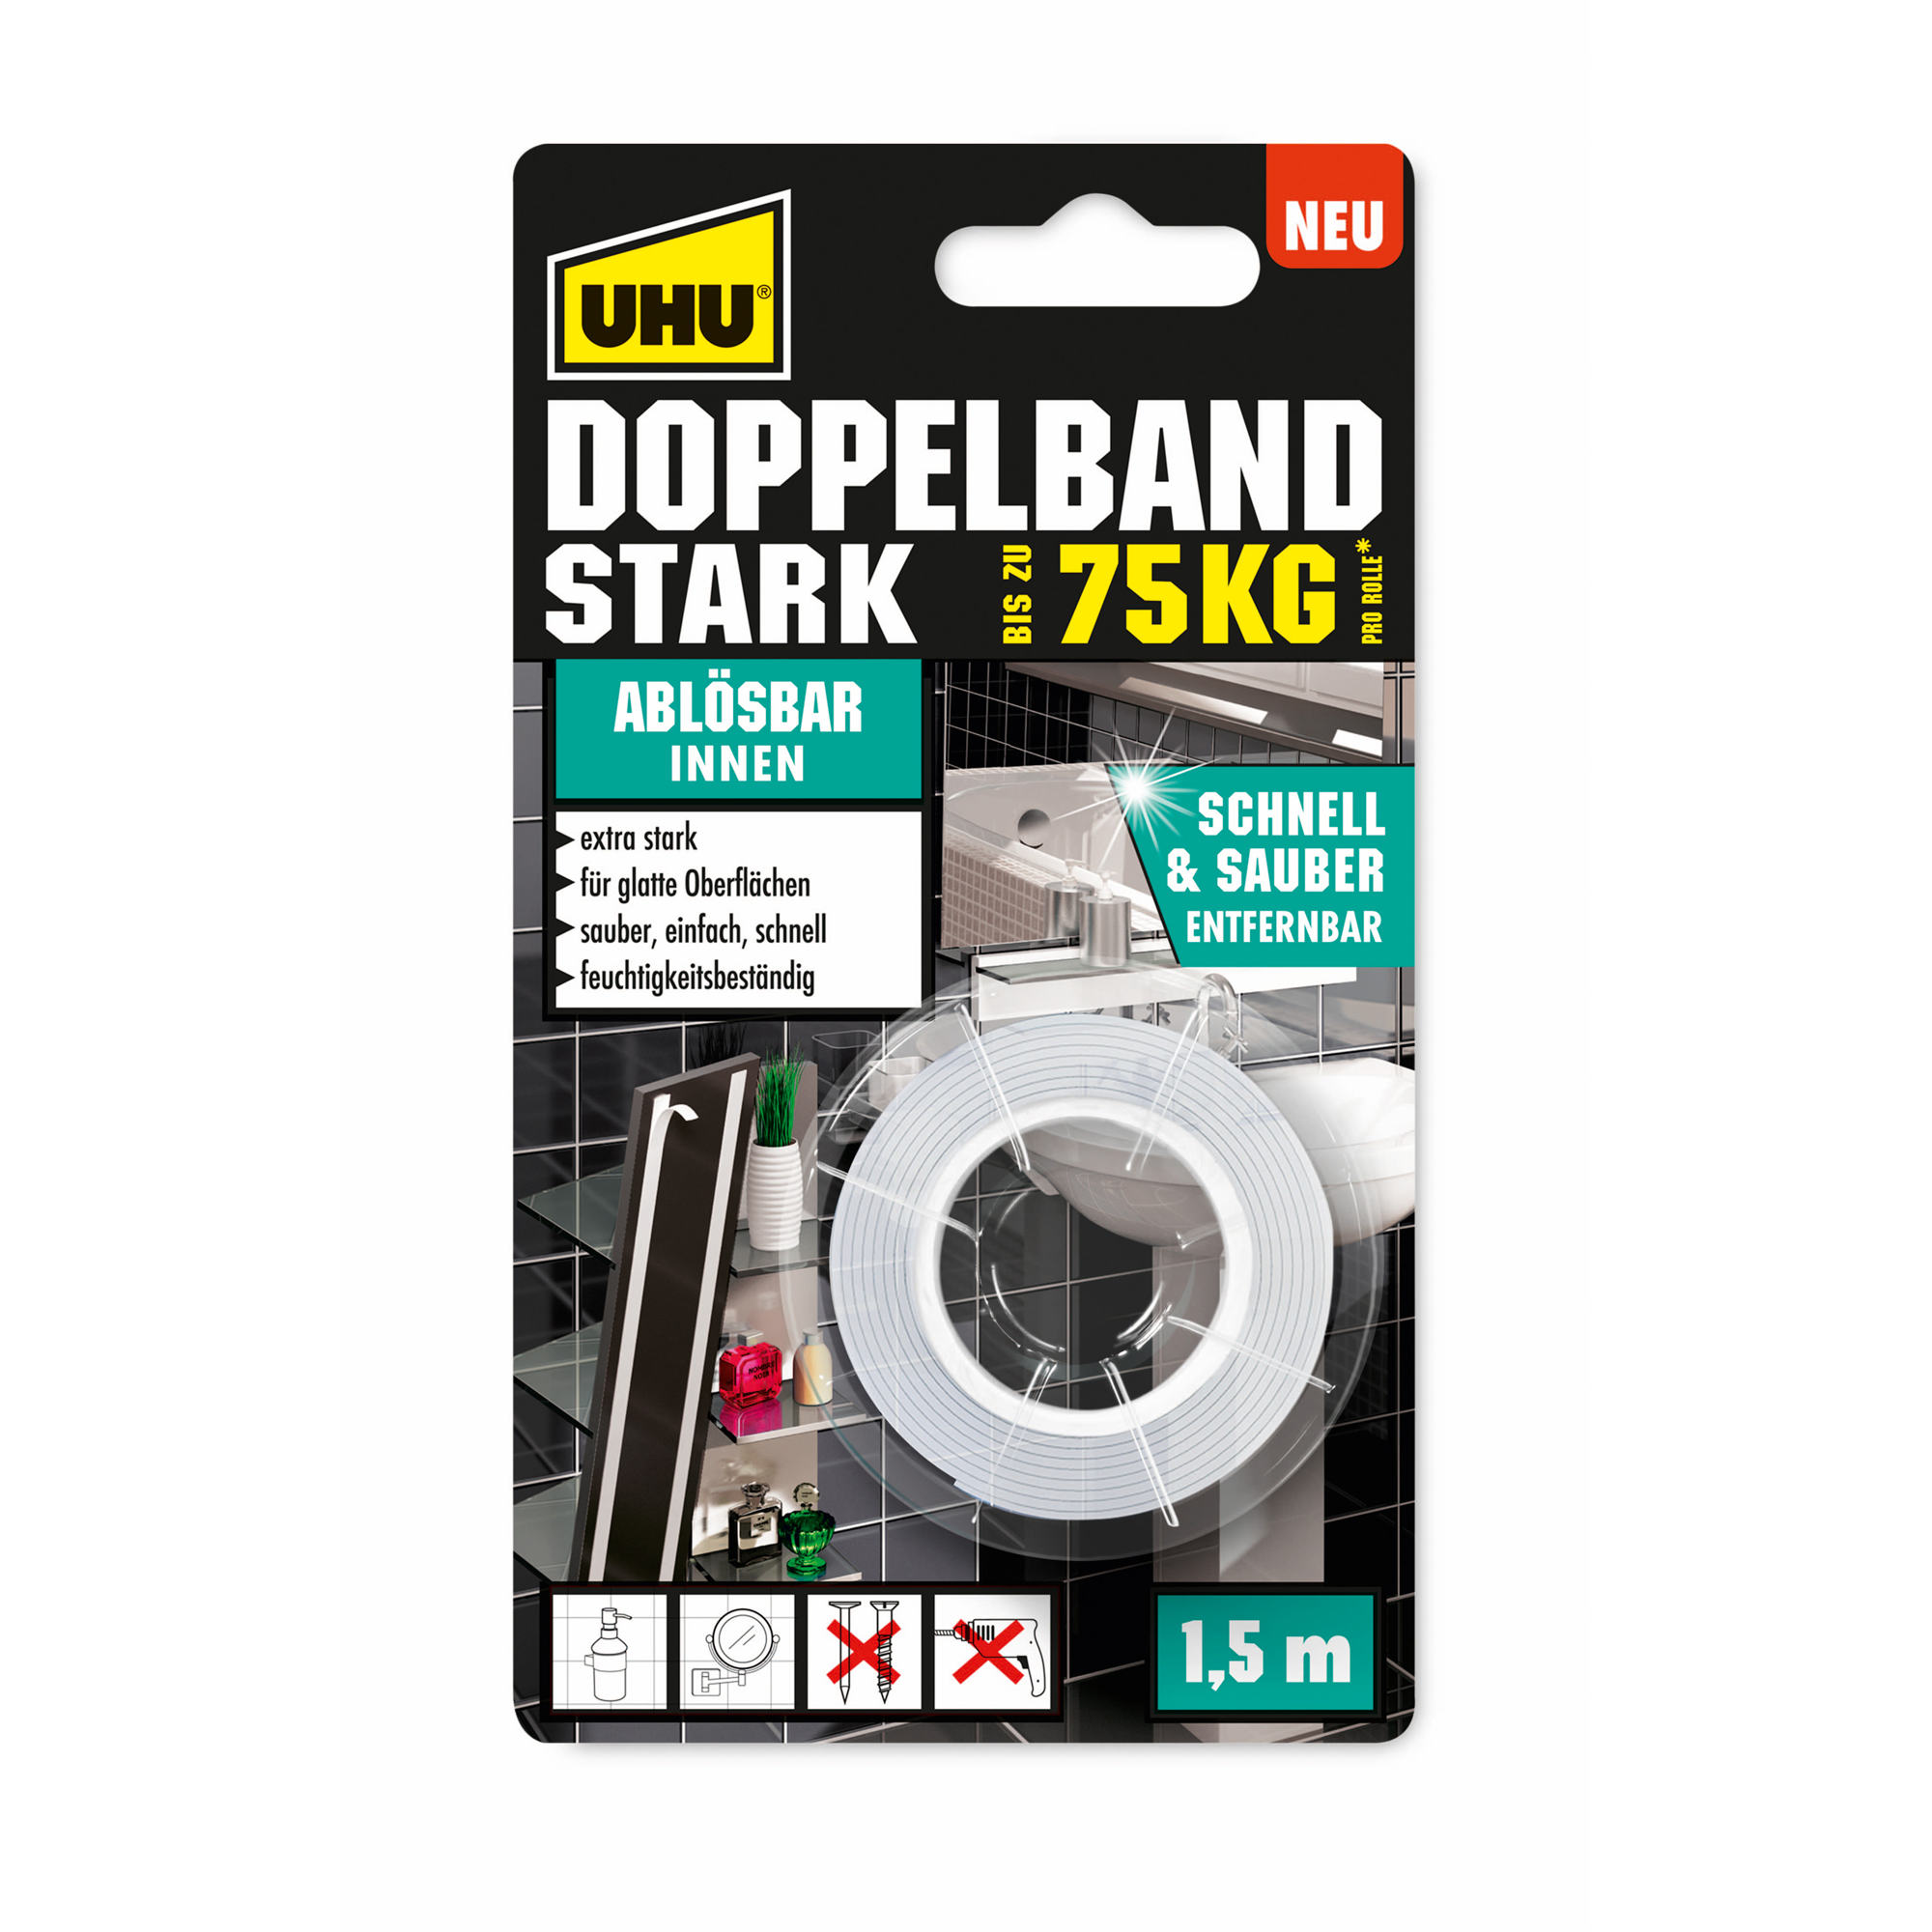 Doppelband 'Stark' ablösbar 1,5 Meter + product picture